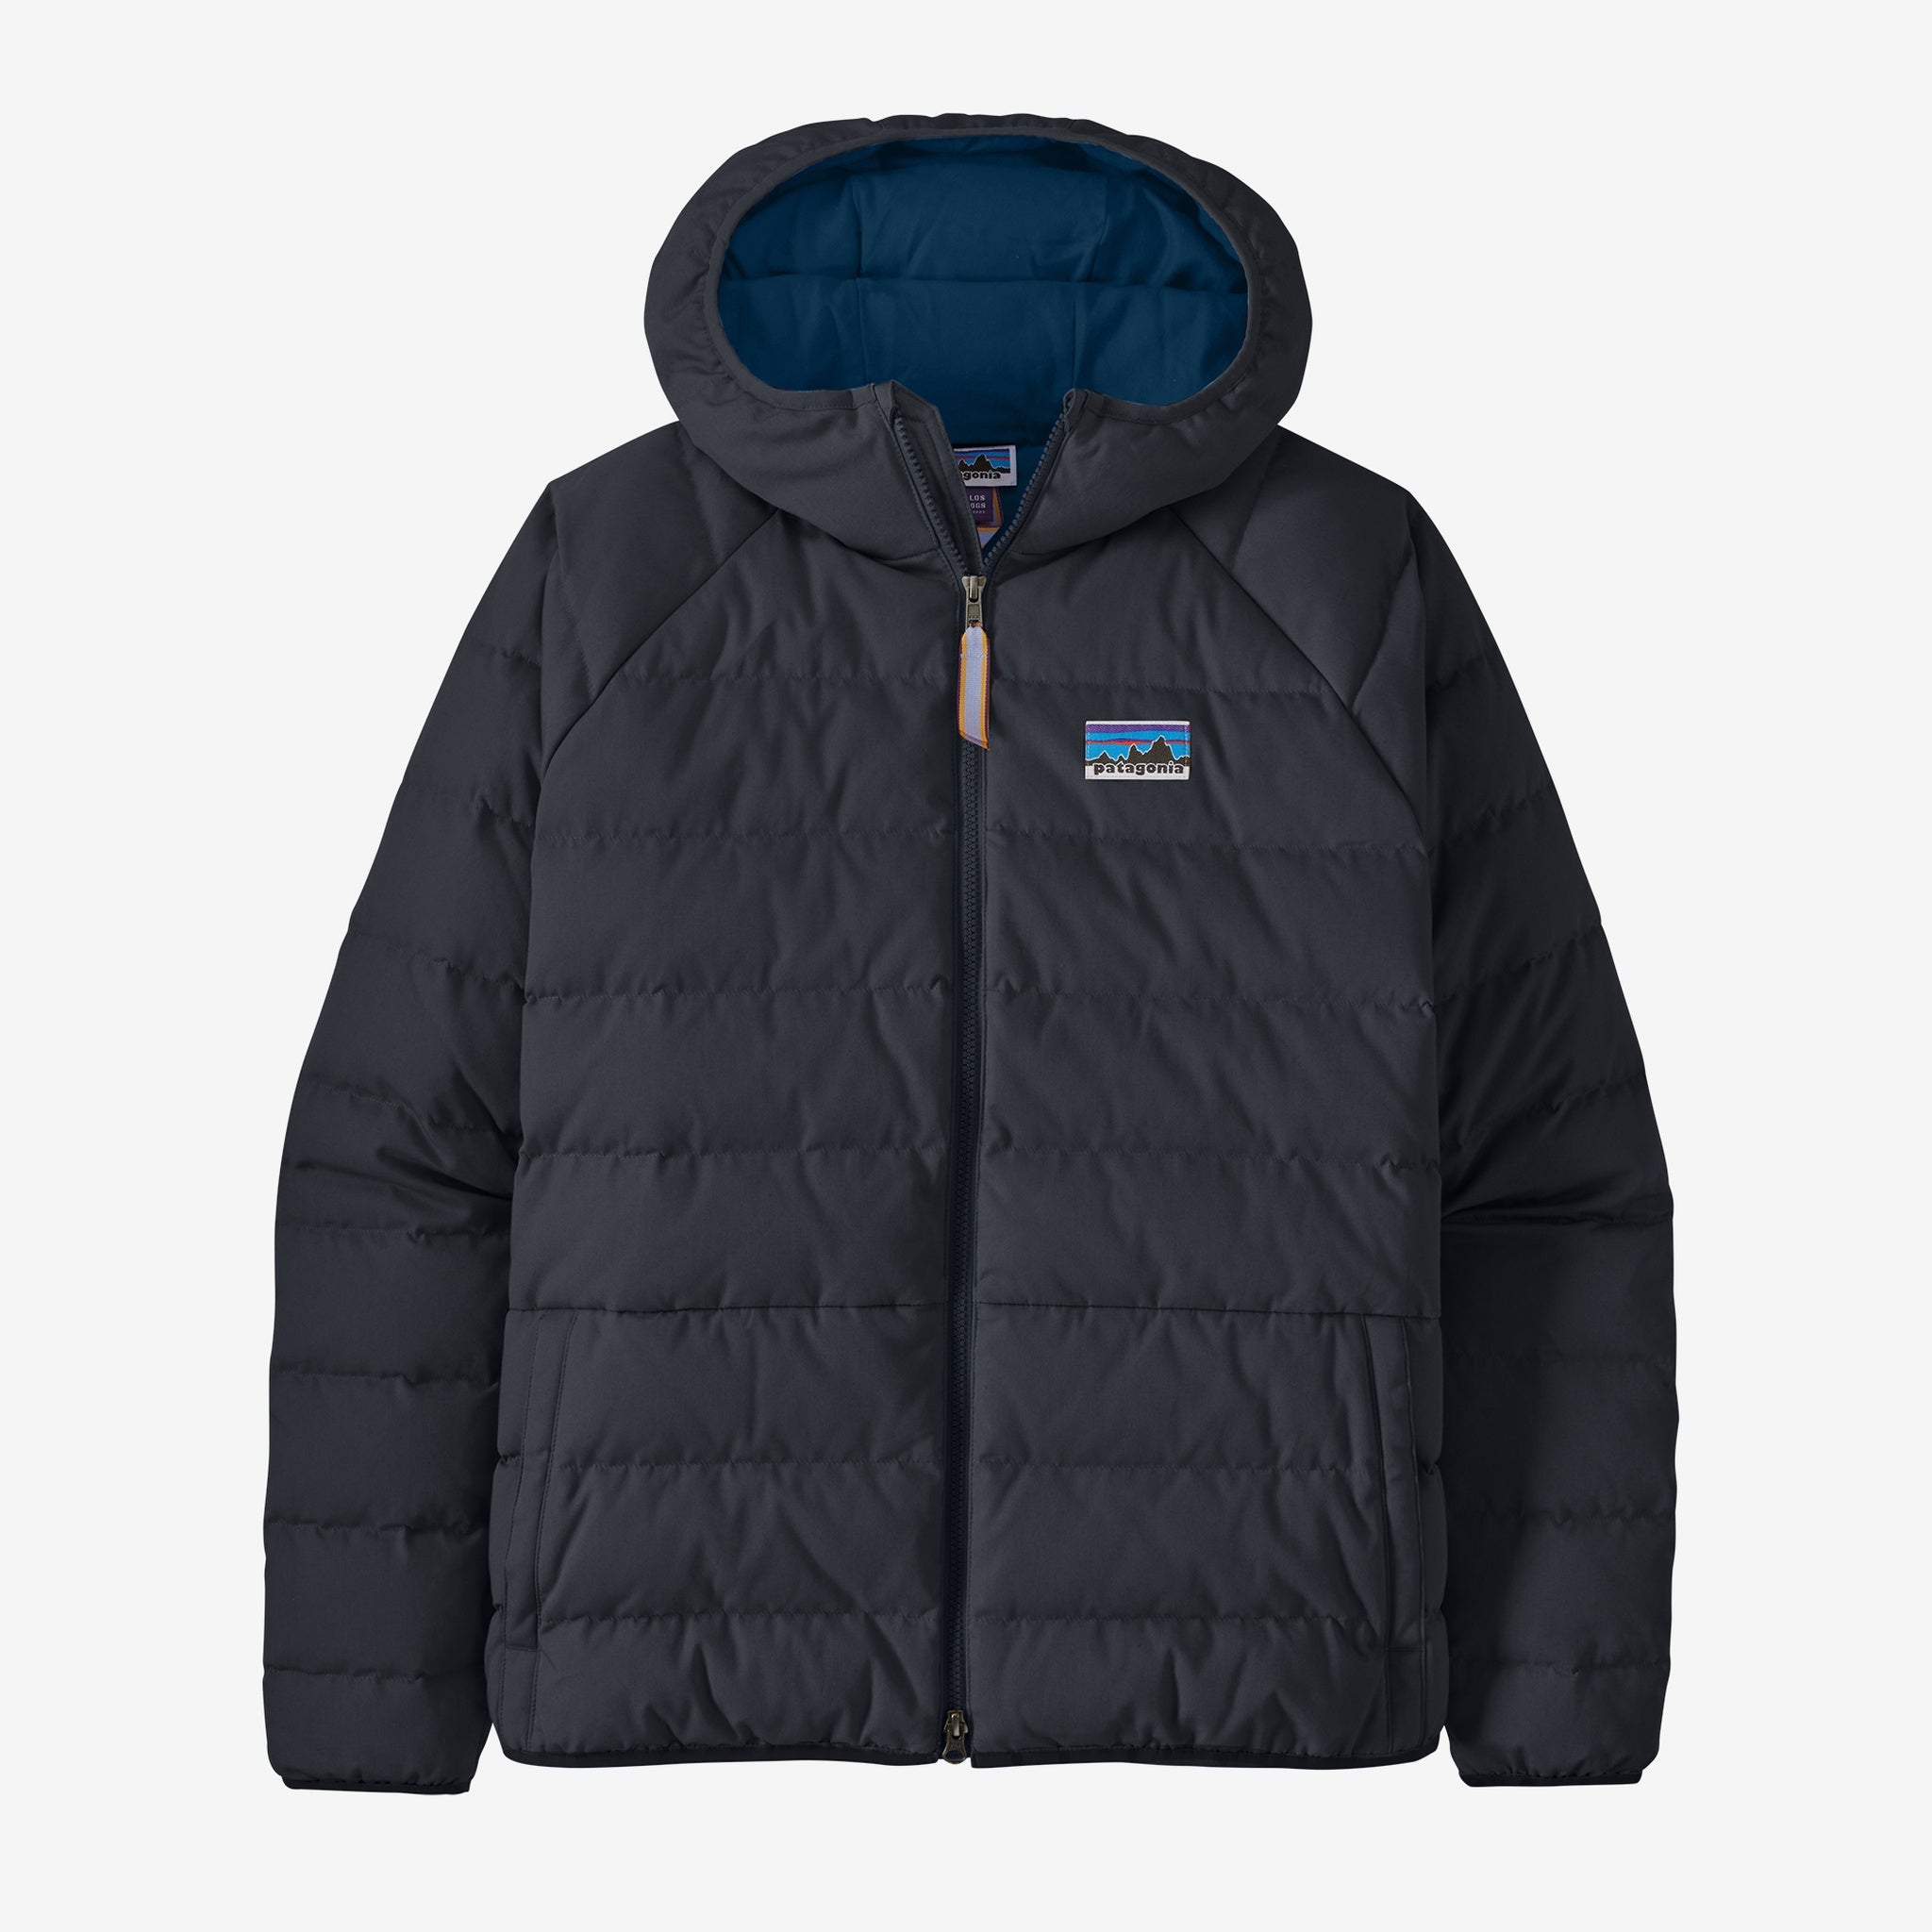 The Patagonia This Cotton Jacket Will Last A Lifetime If You Take Care Of  It Cotton Jacket Should Last A Lifetime - Men's Journal